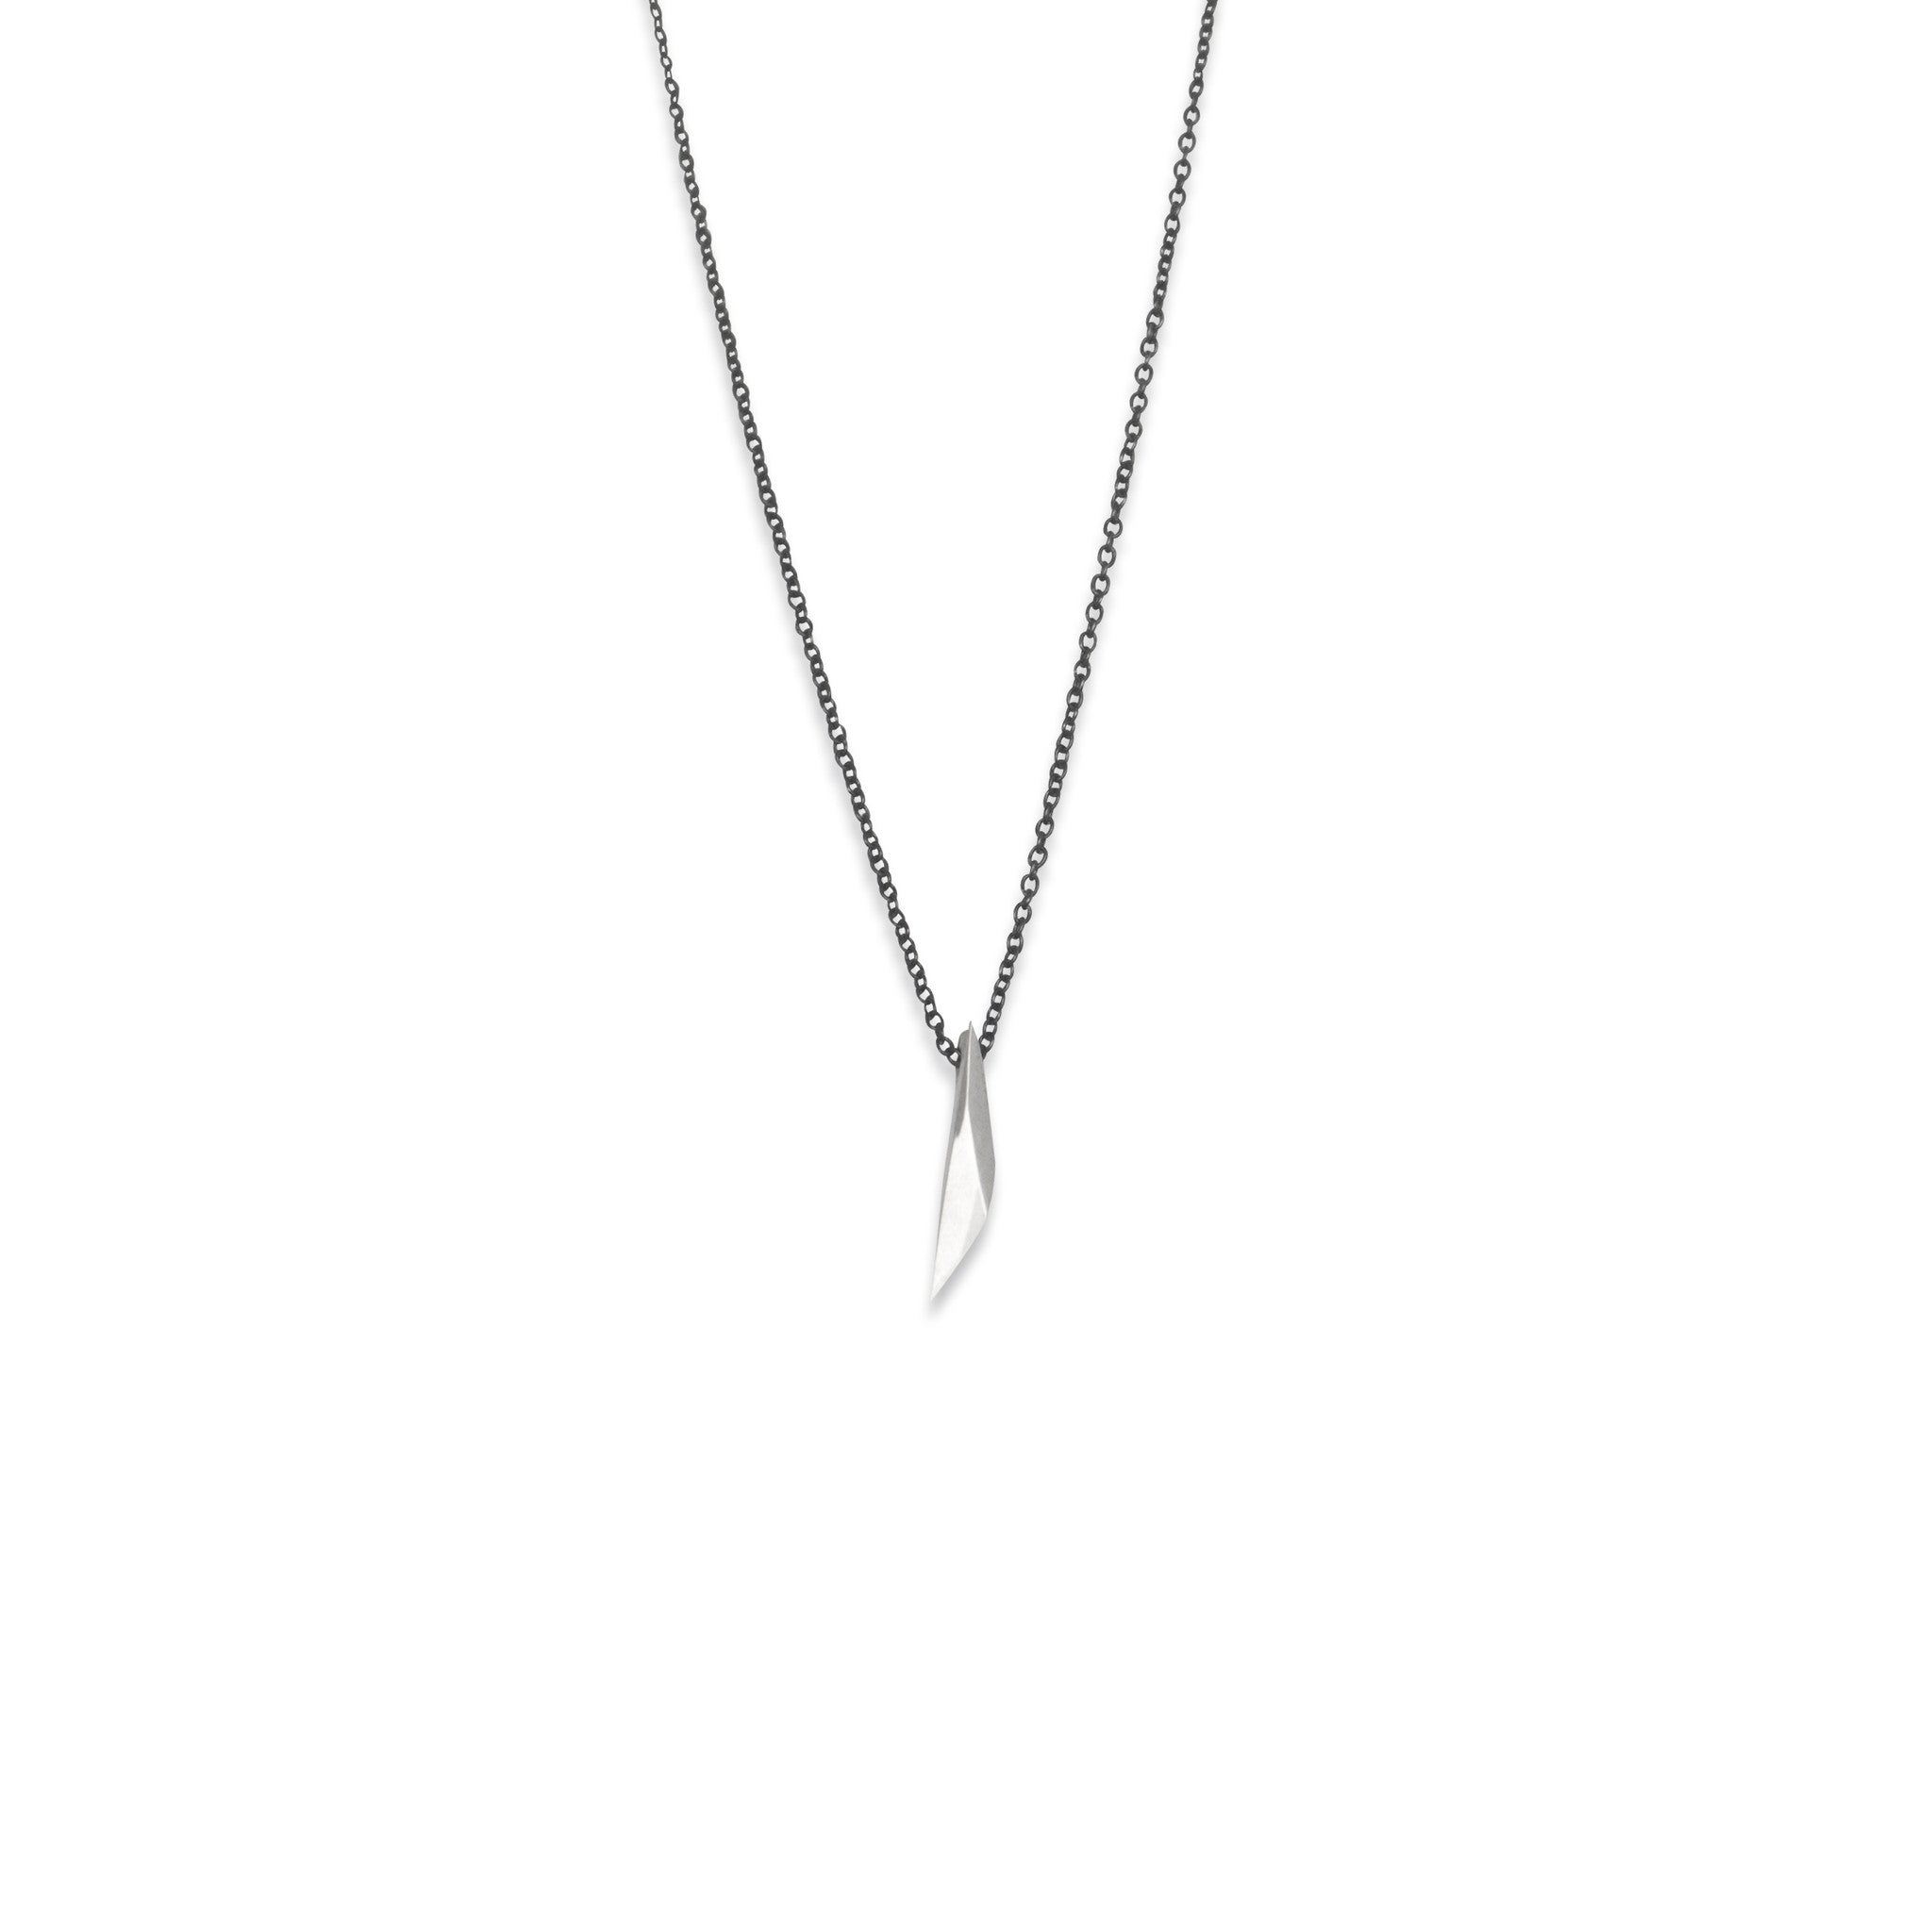 sterling silver/oxi chain vertical shard necklace